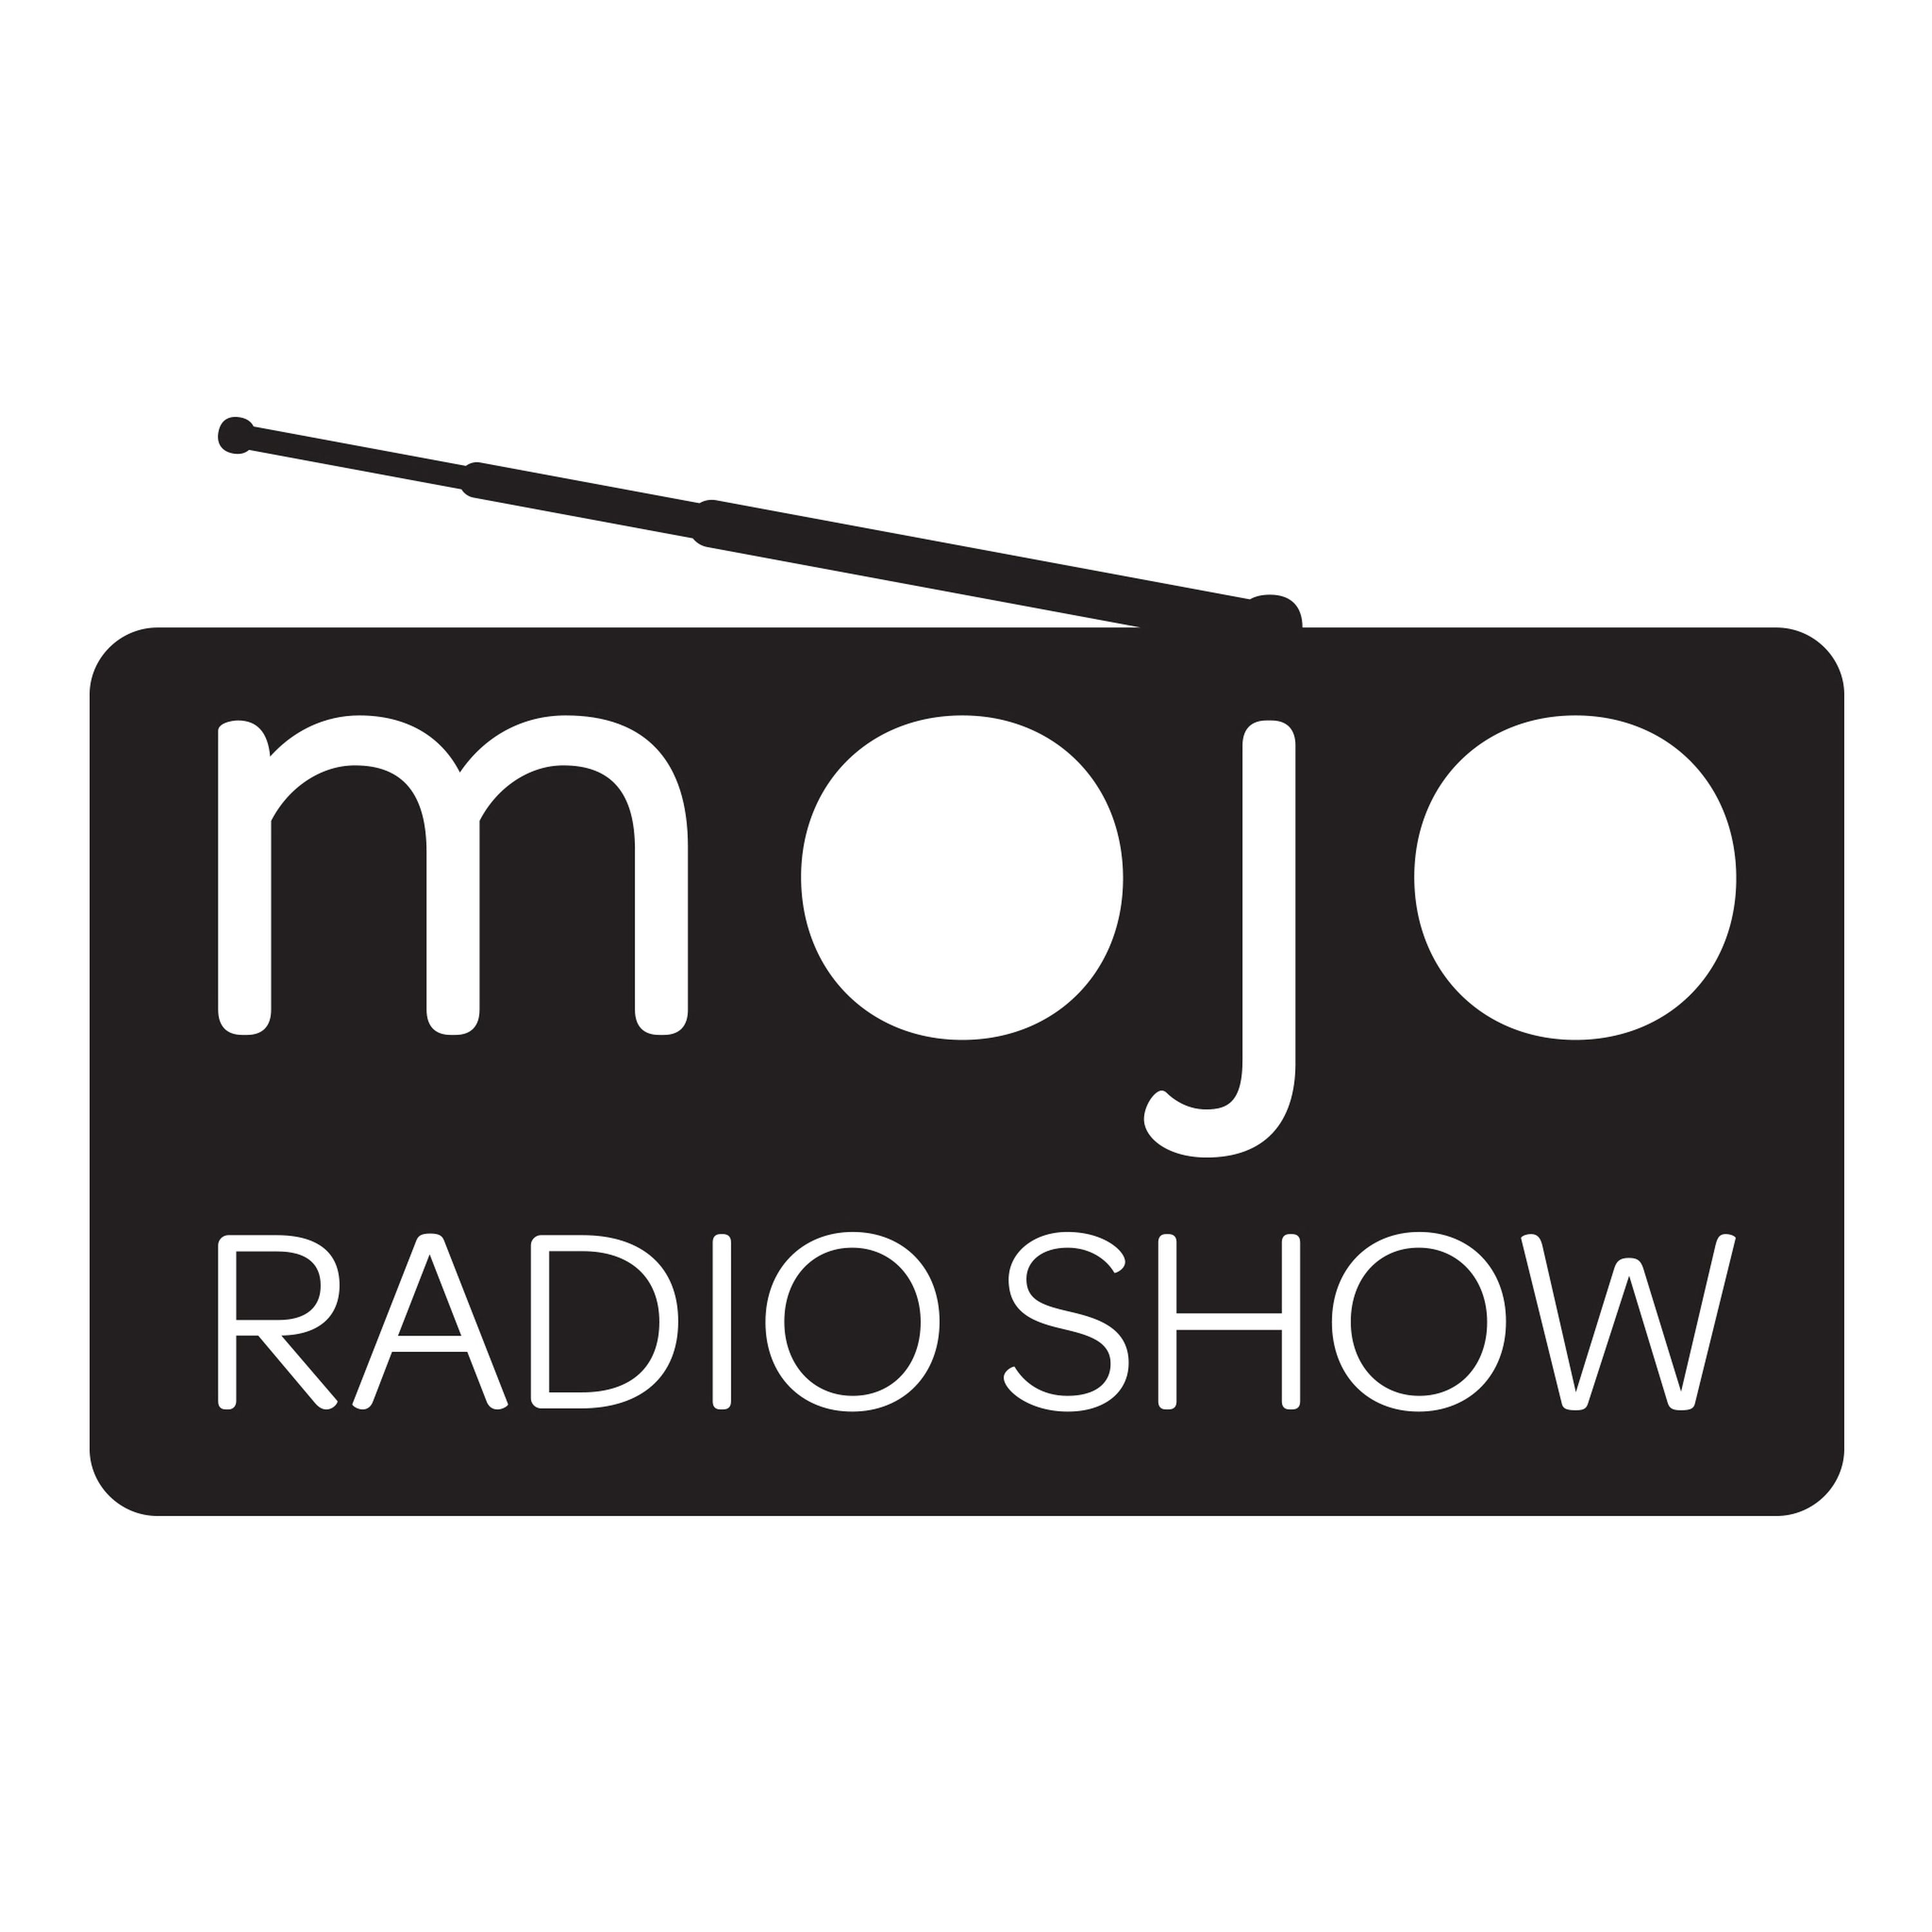 The Mojo Radio Show EP 160: Building Your Future, Getting Beyond What’s Holding You Back - Lukas Schwekendiek